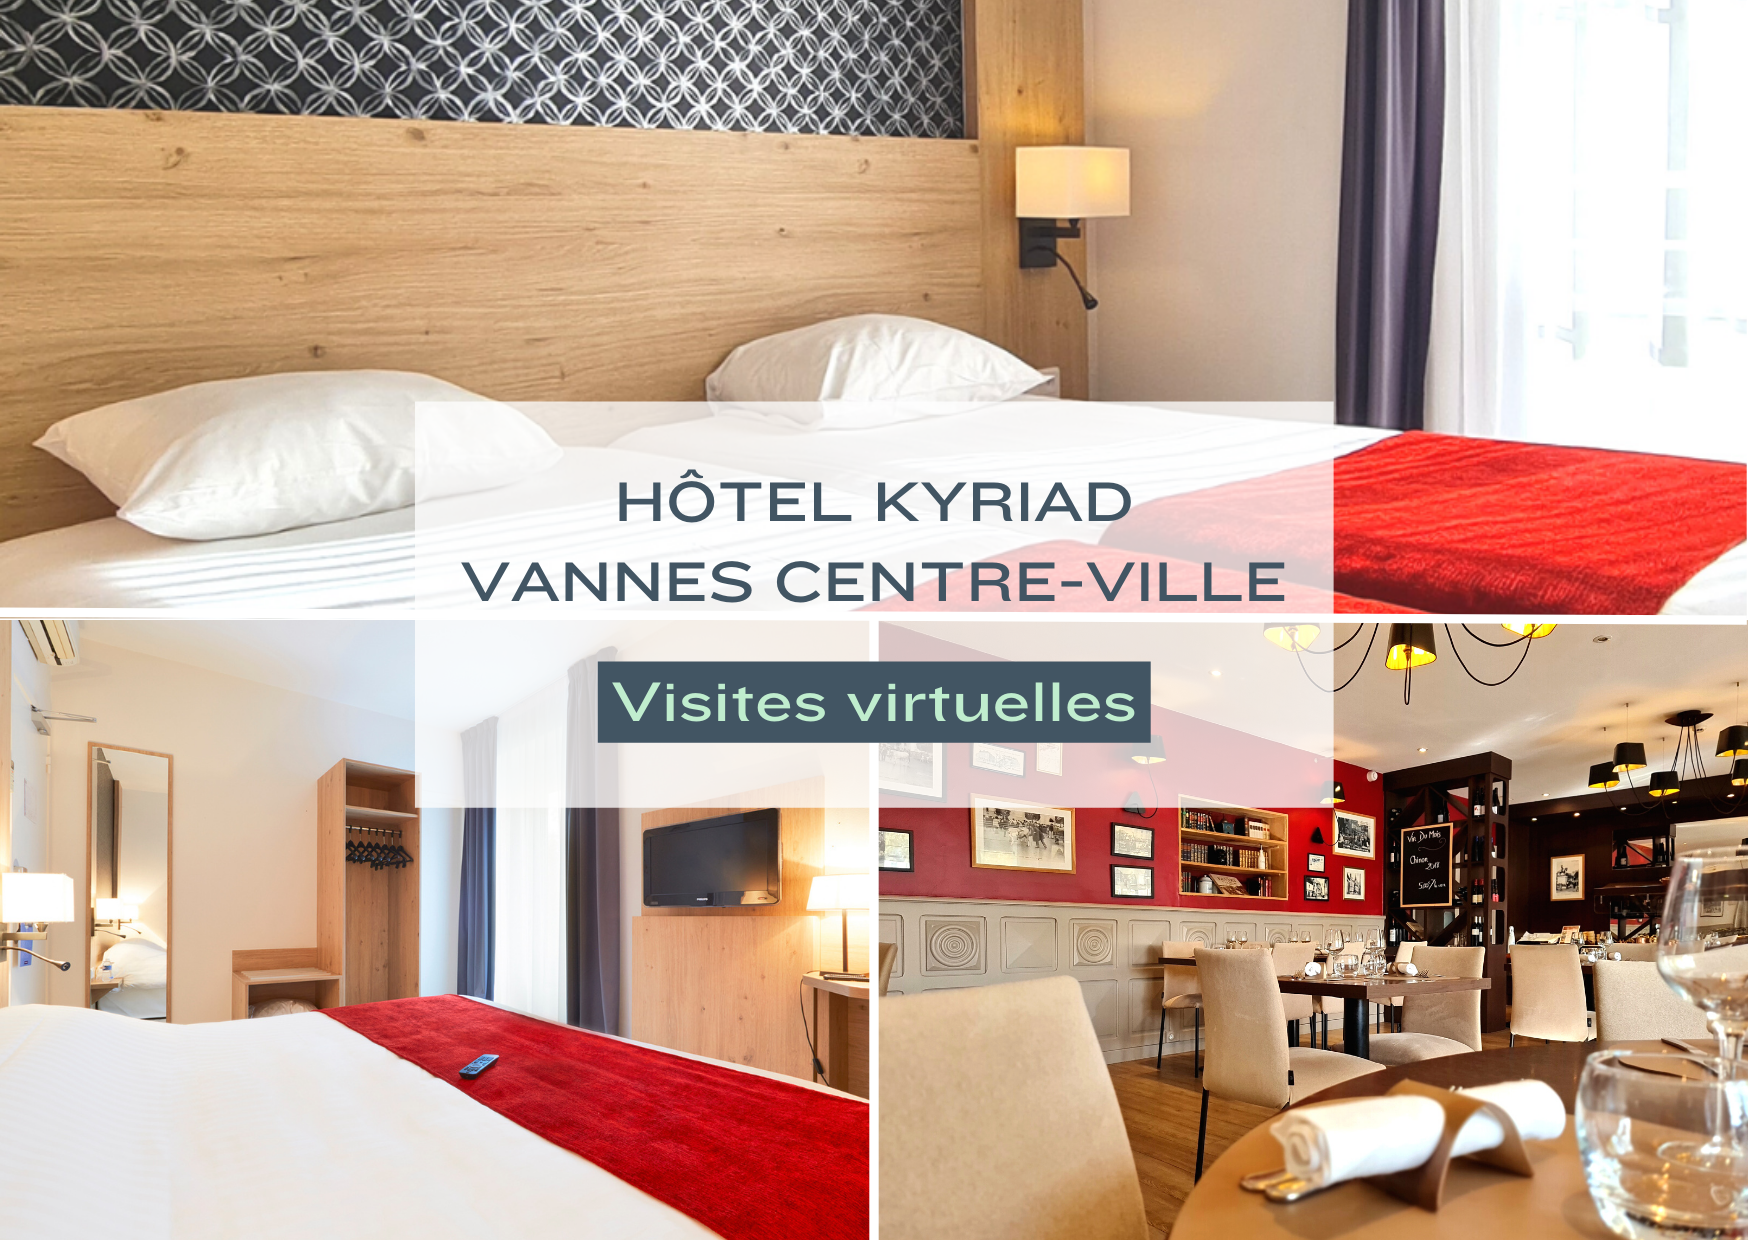 Visit our hotel in Vannes virtually!